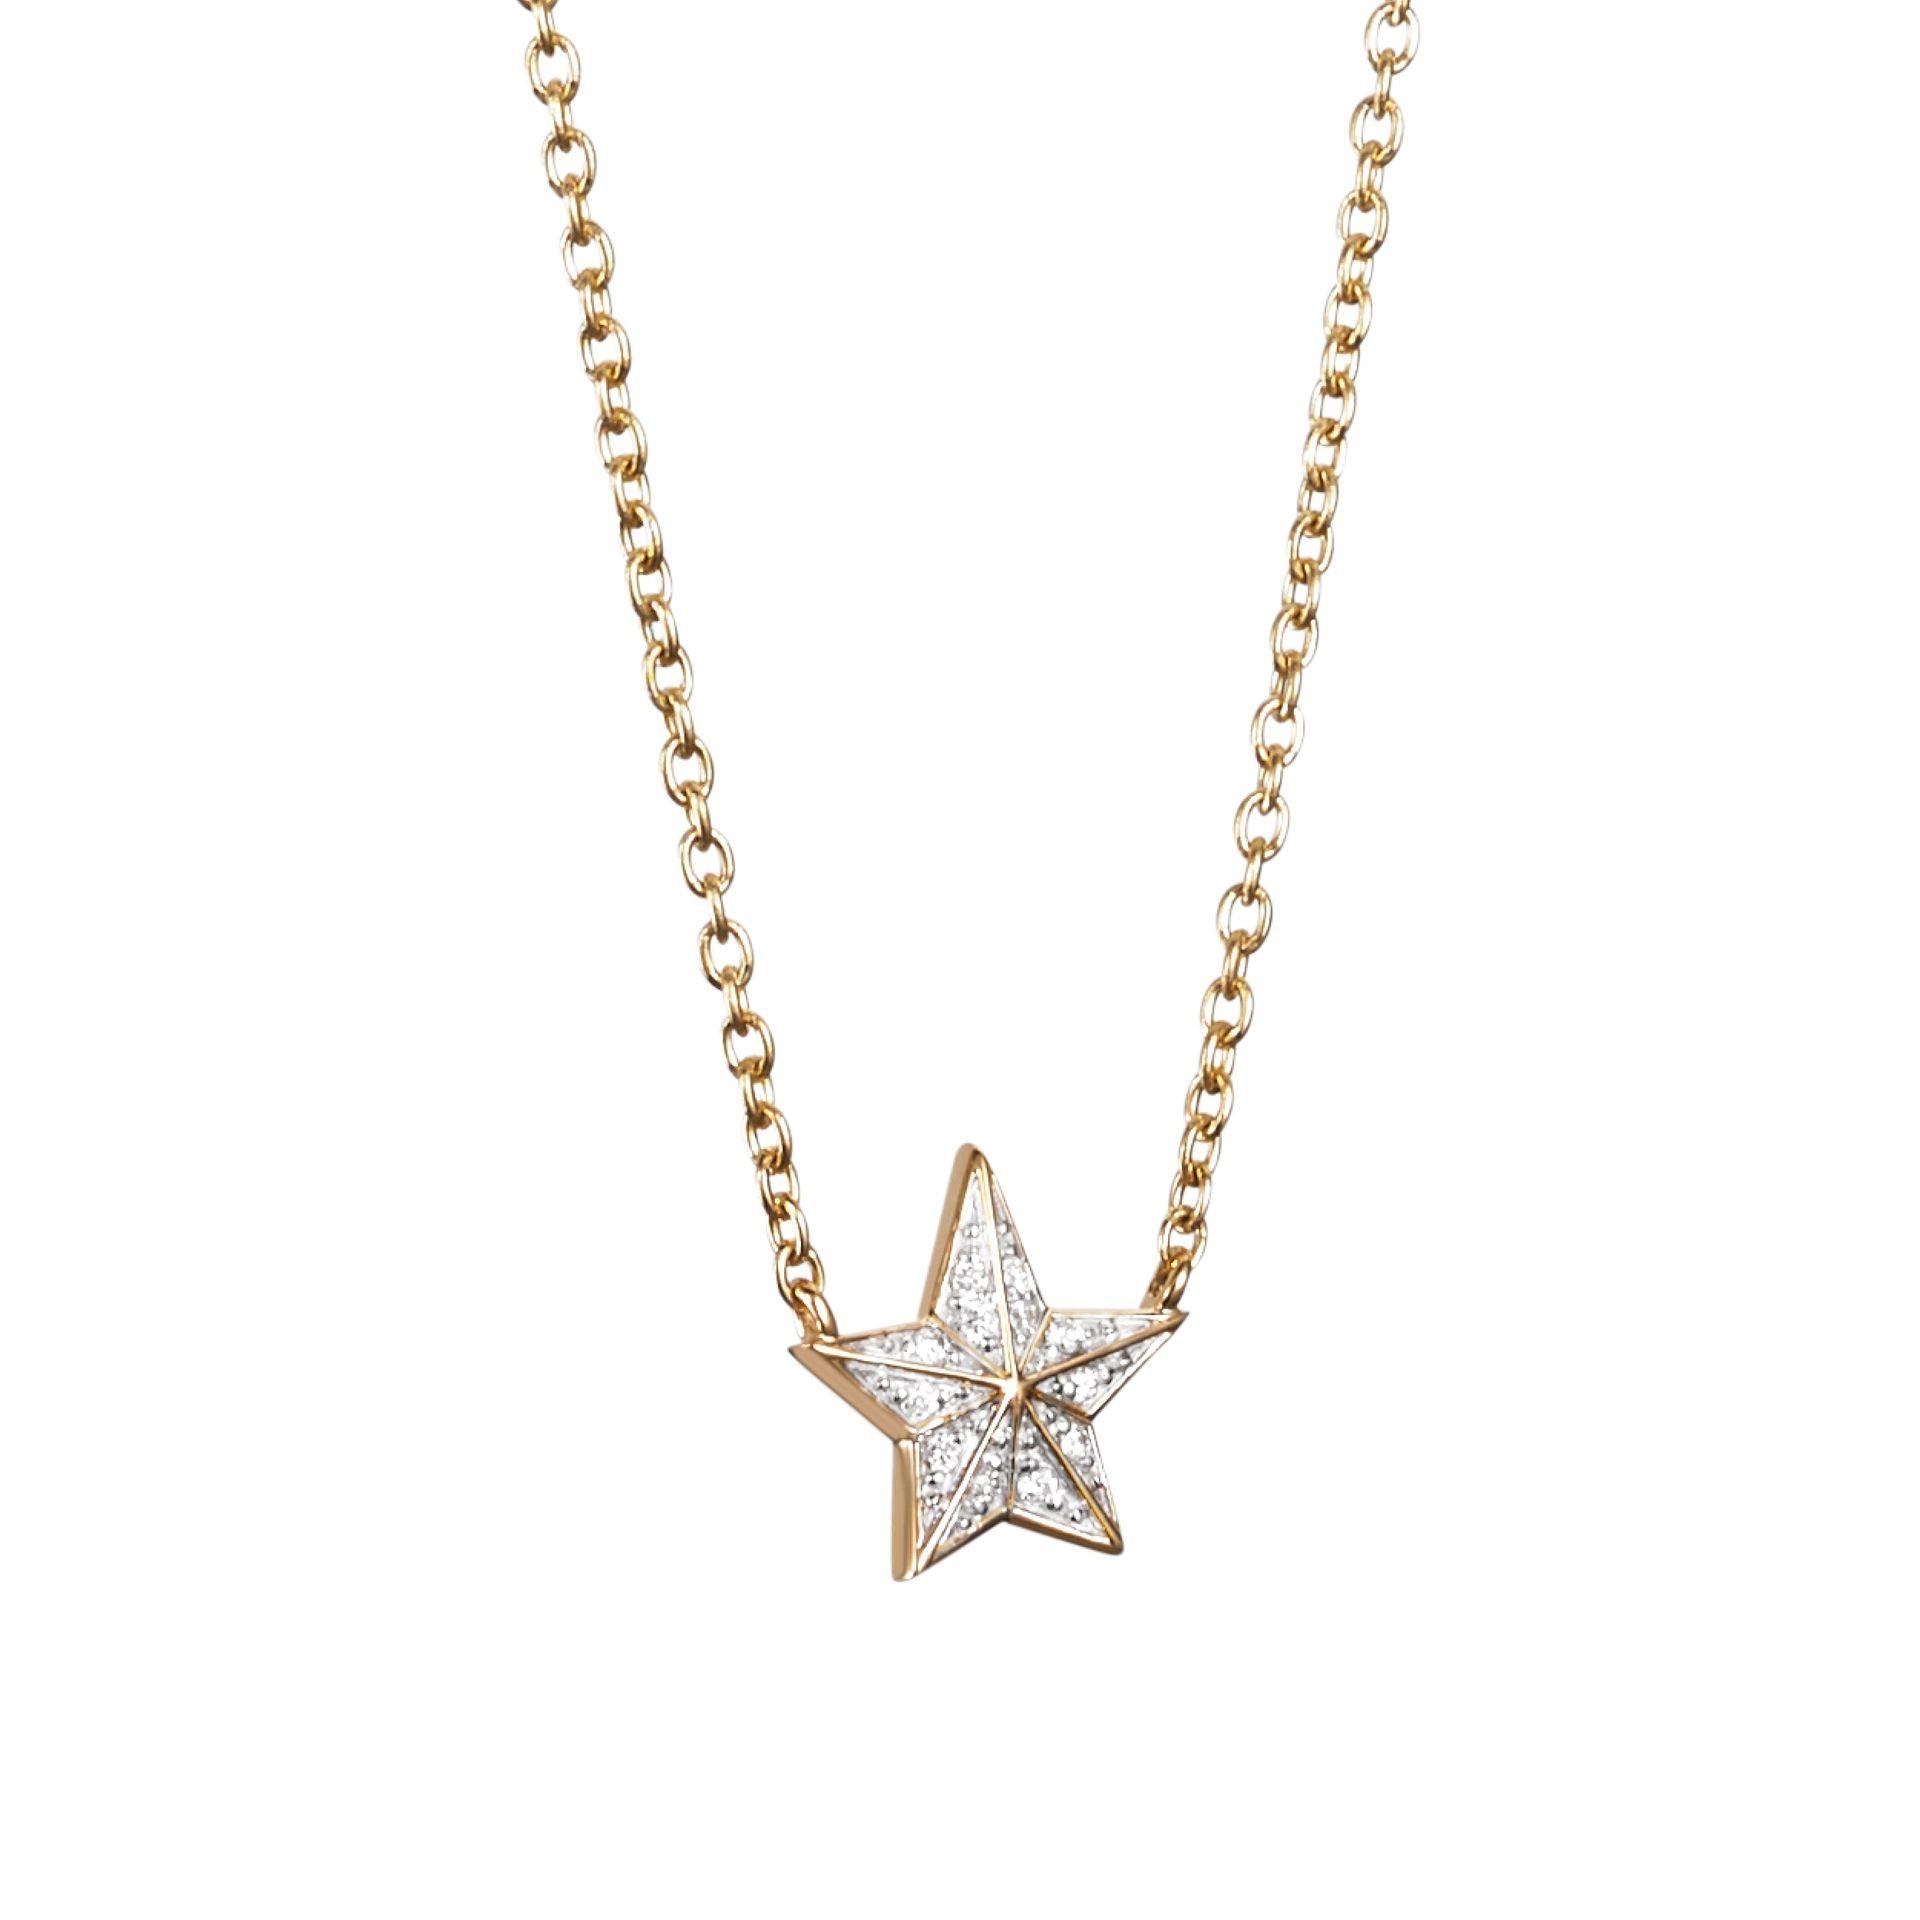 Catch A Falling Star & Stars Necklace.